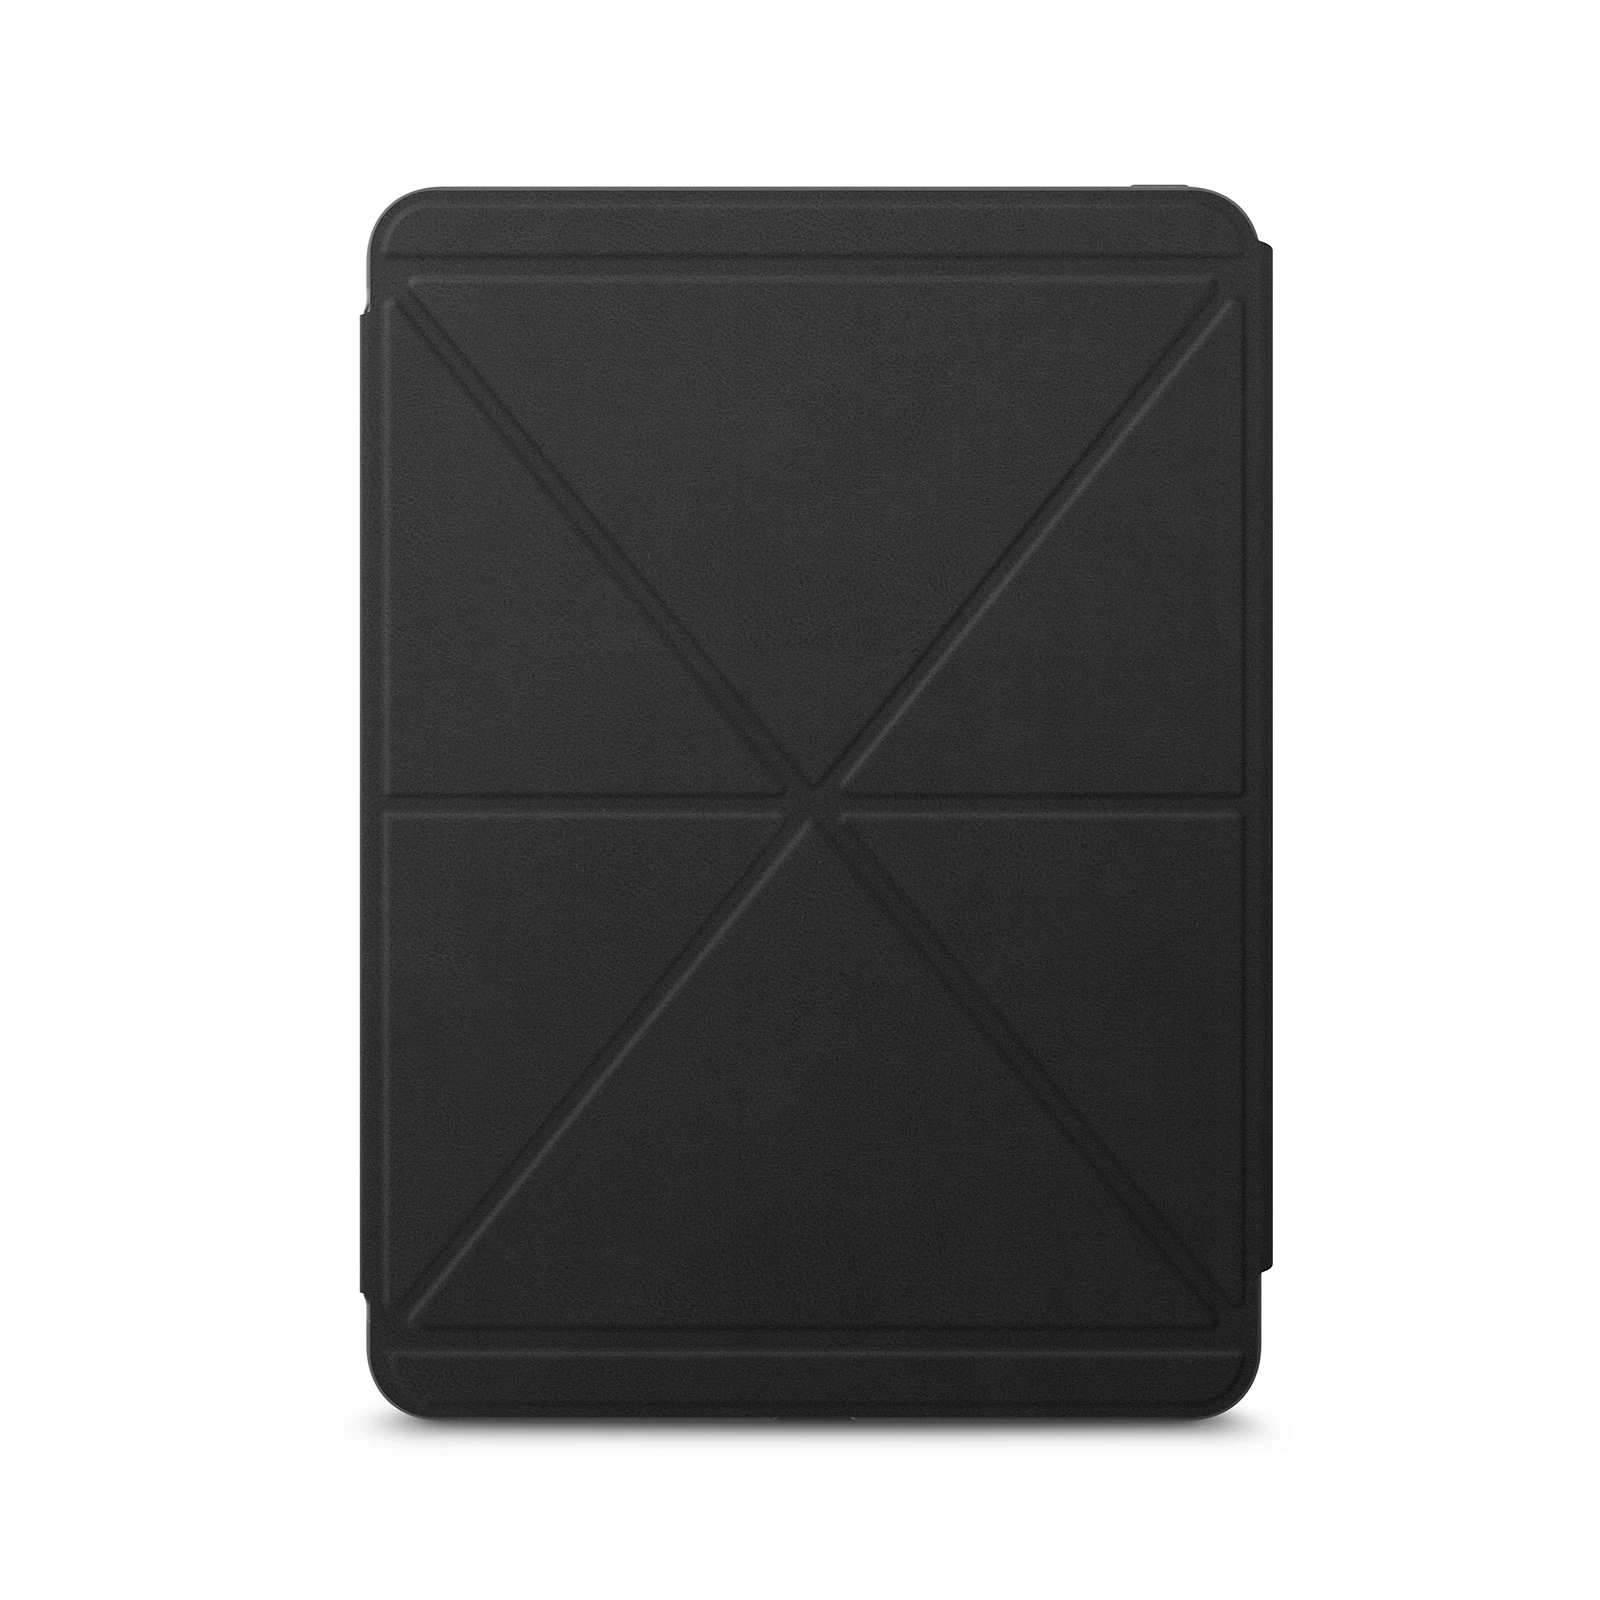 Moshi VersaCover Case with Folding Cover Charcoal Black for iPad Pro 12.9" M1 (5th Gen) (99MO056085)